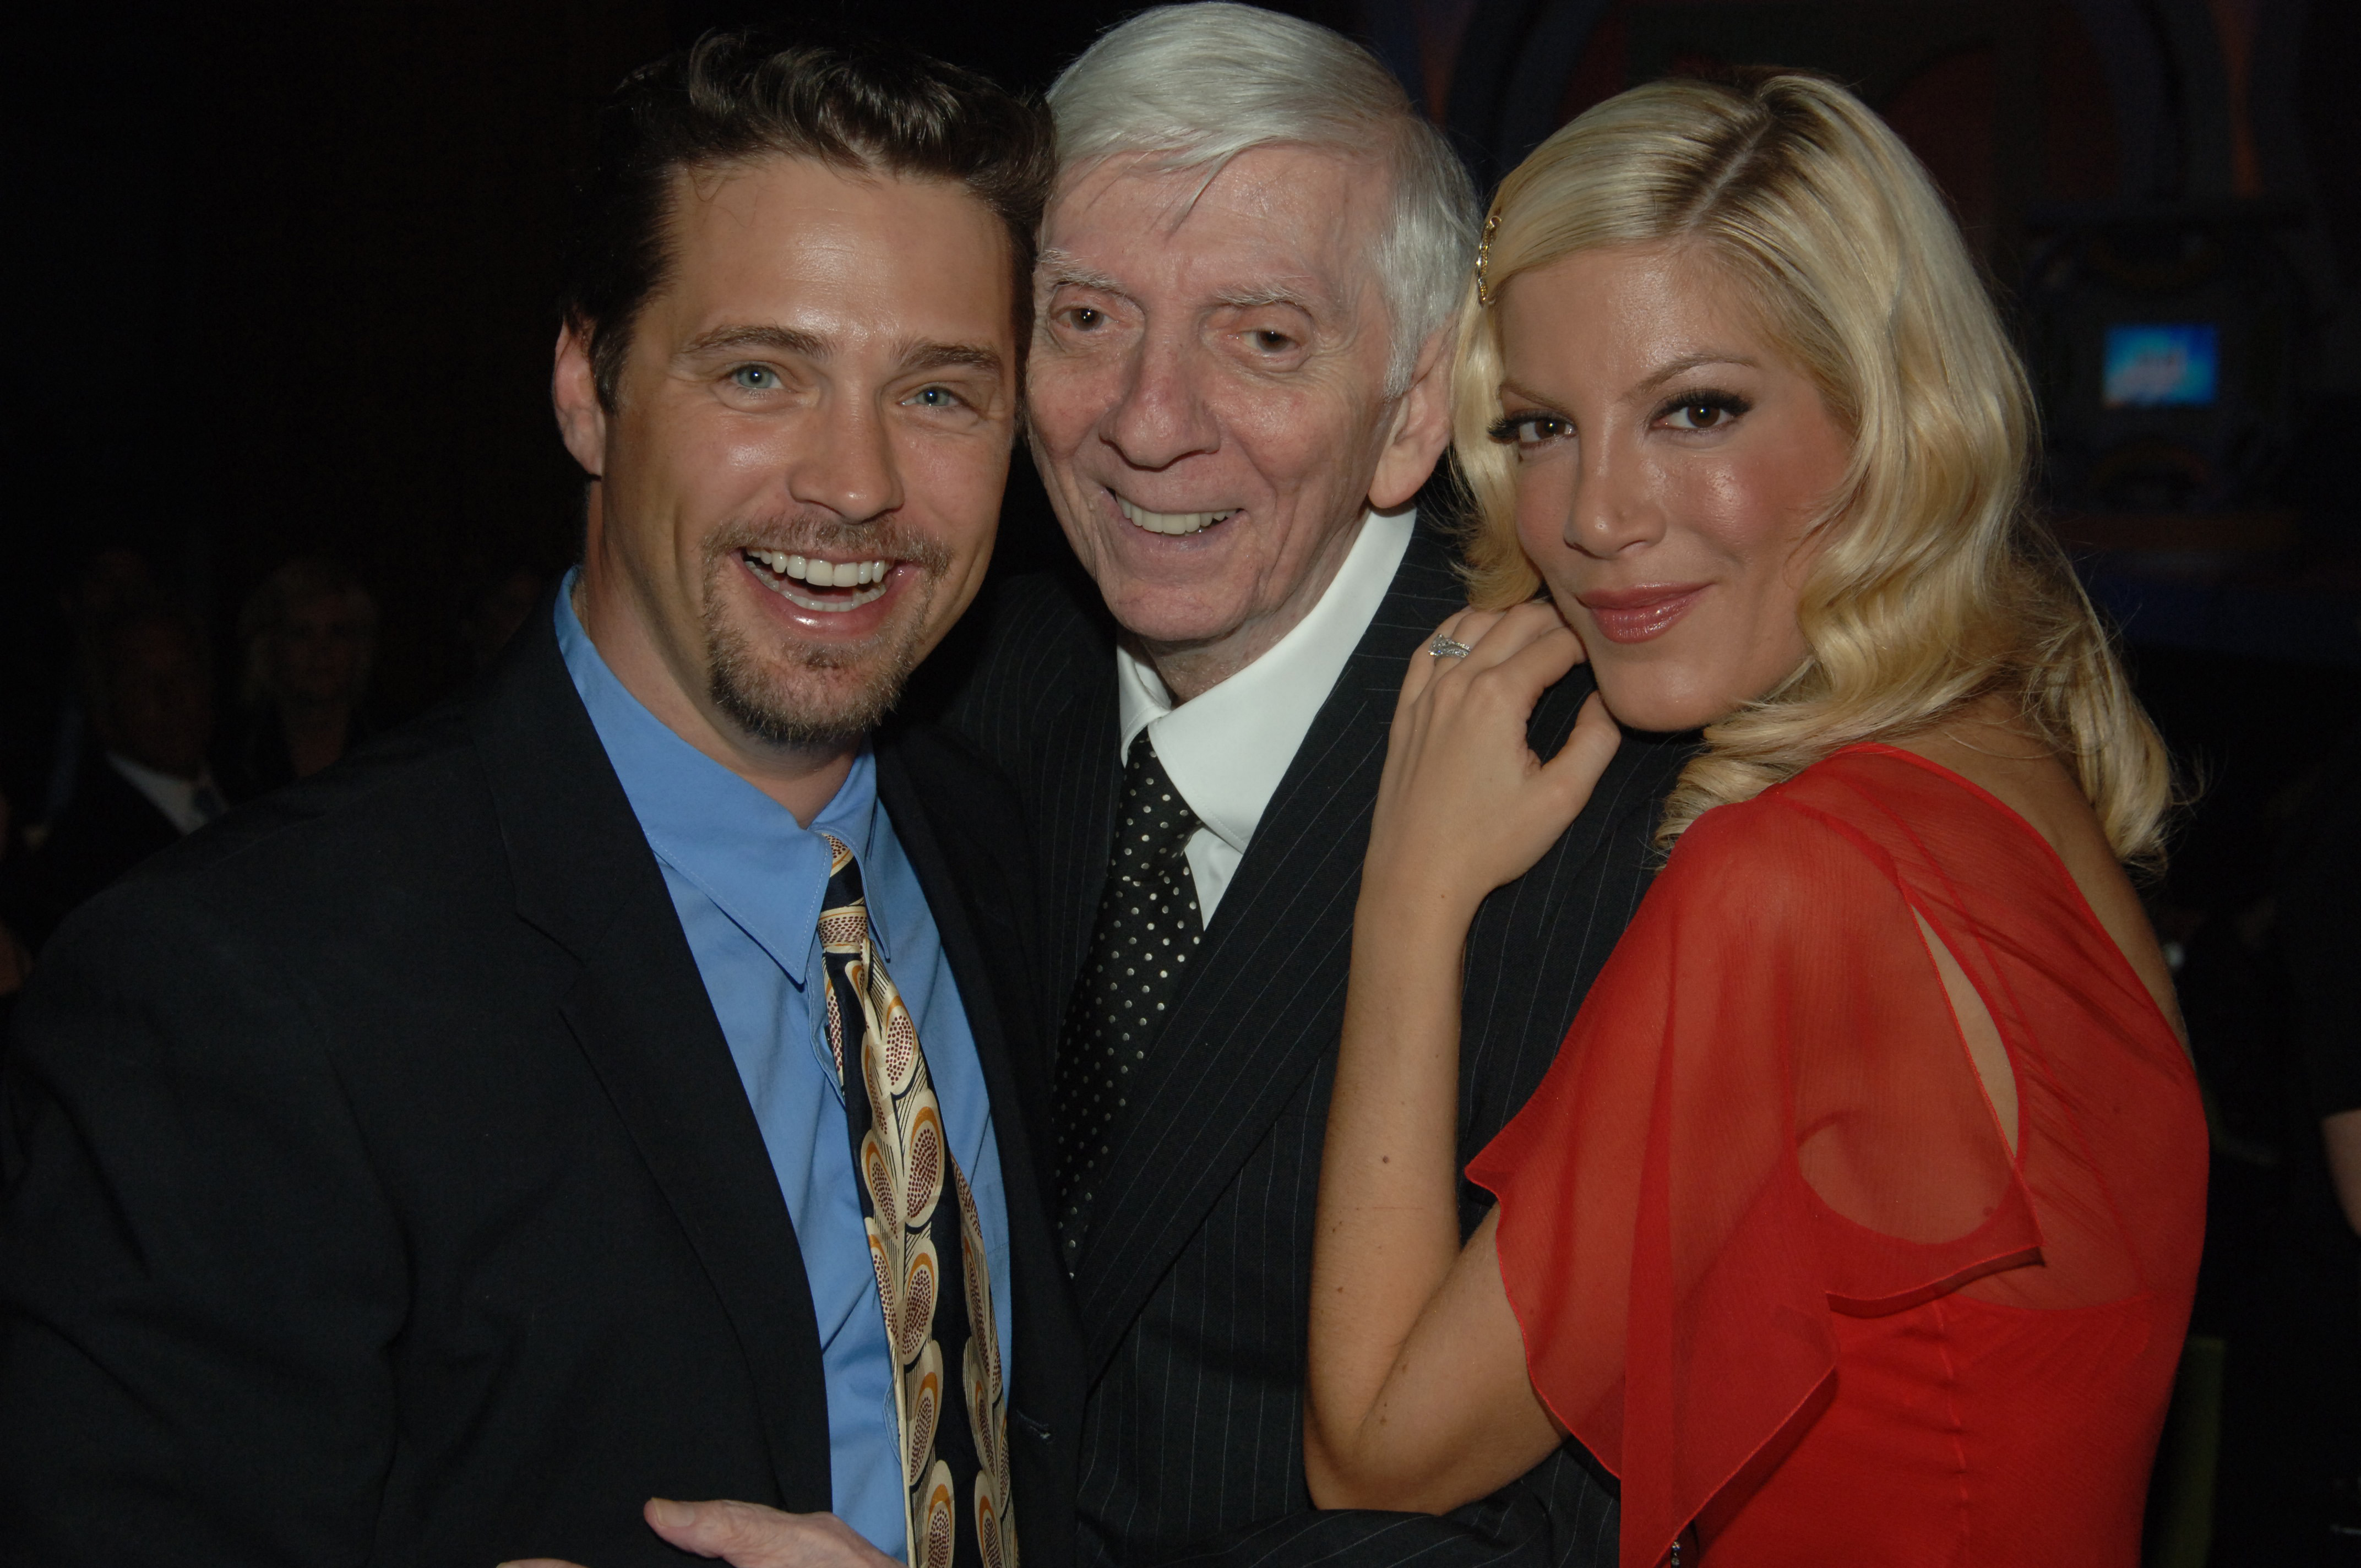 Jason Priestley, Aaron Spelling and Tori Spelling during 2005 TV Land Awards - Backstage at Barker Hangar in Santa Monica, California, United States on March 13, 2005. | Source: Getty Images